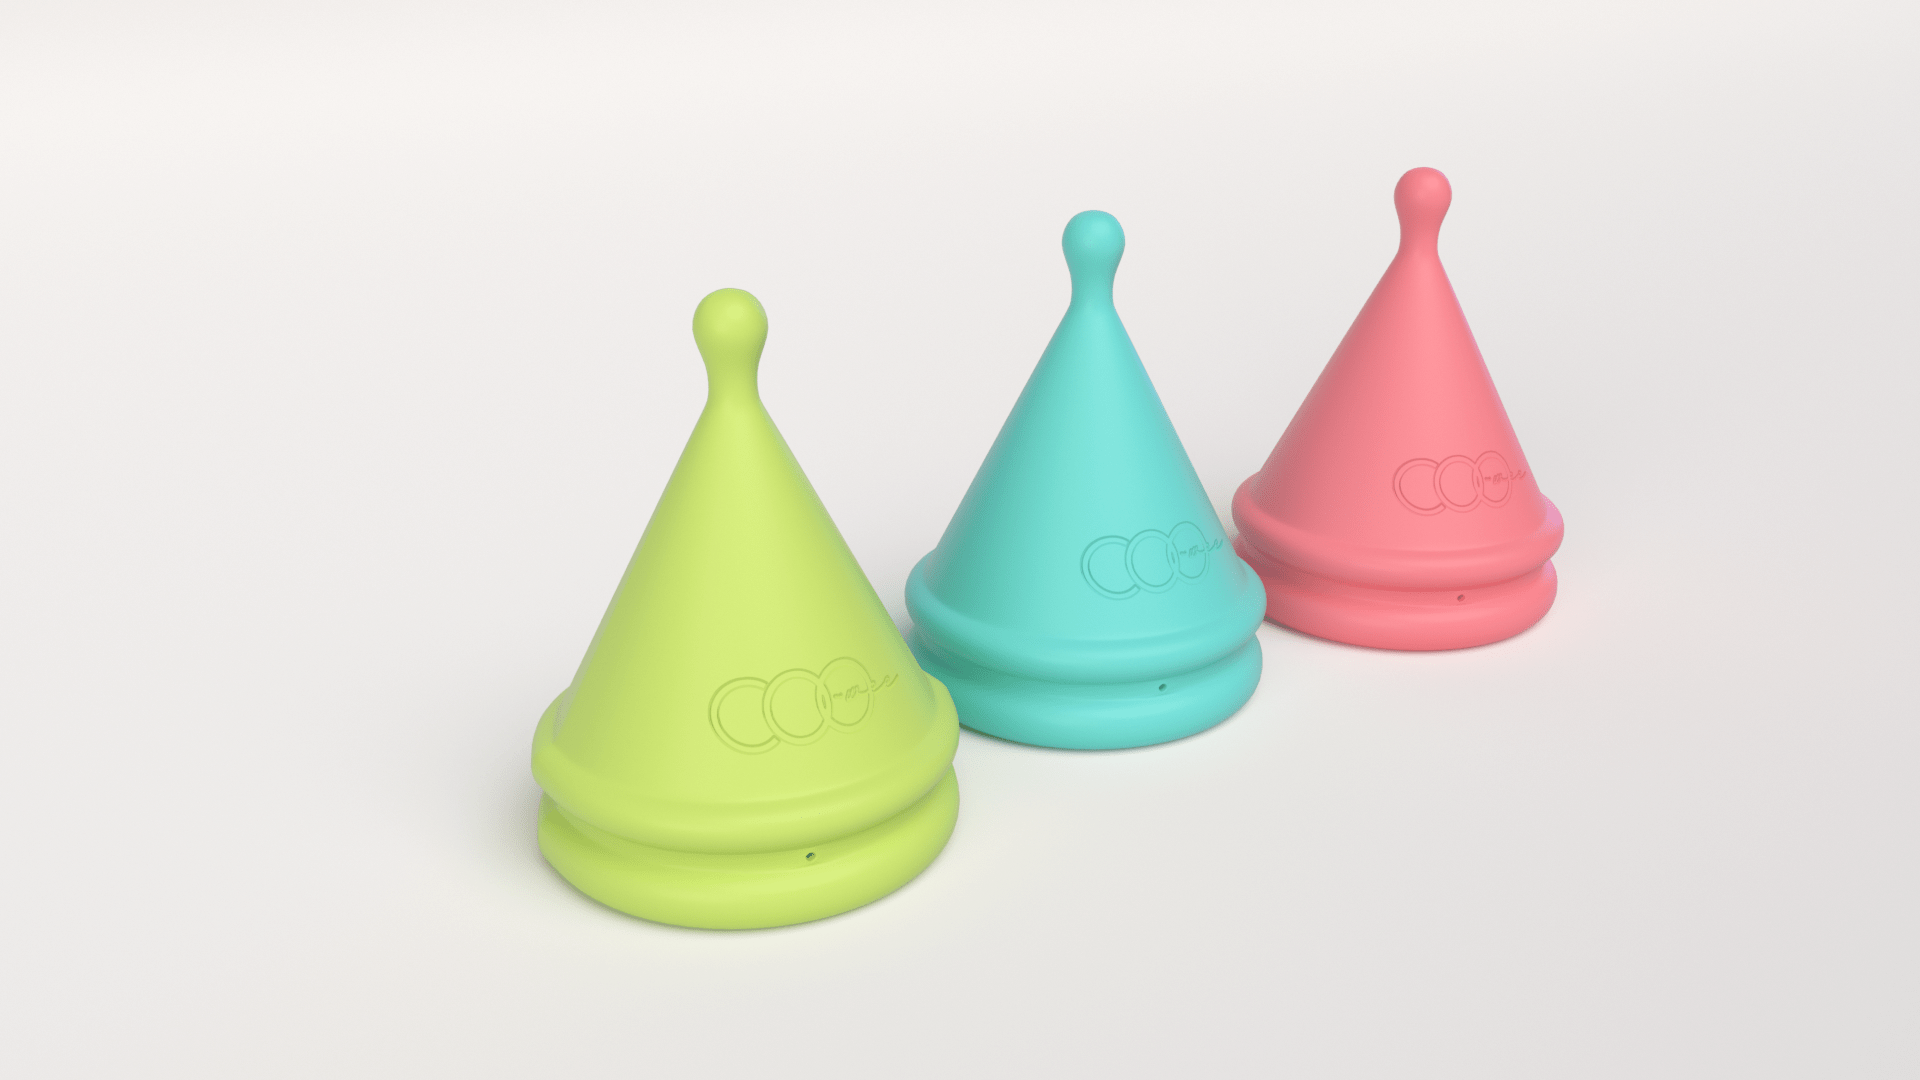 Coo Wee Incontinence Cups helps manage bladder leaks.